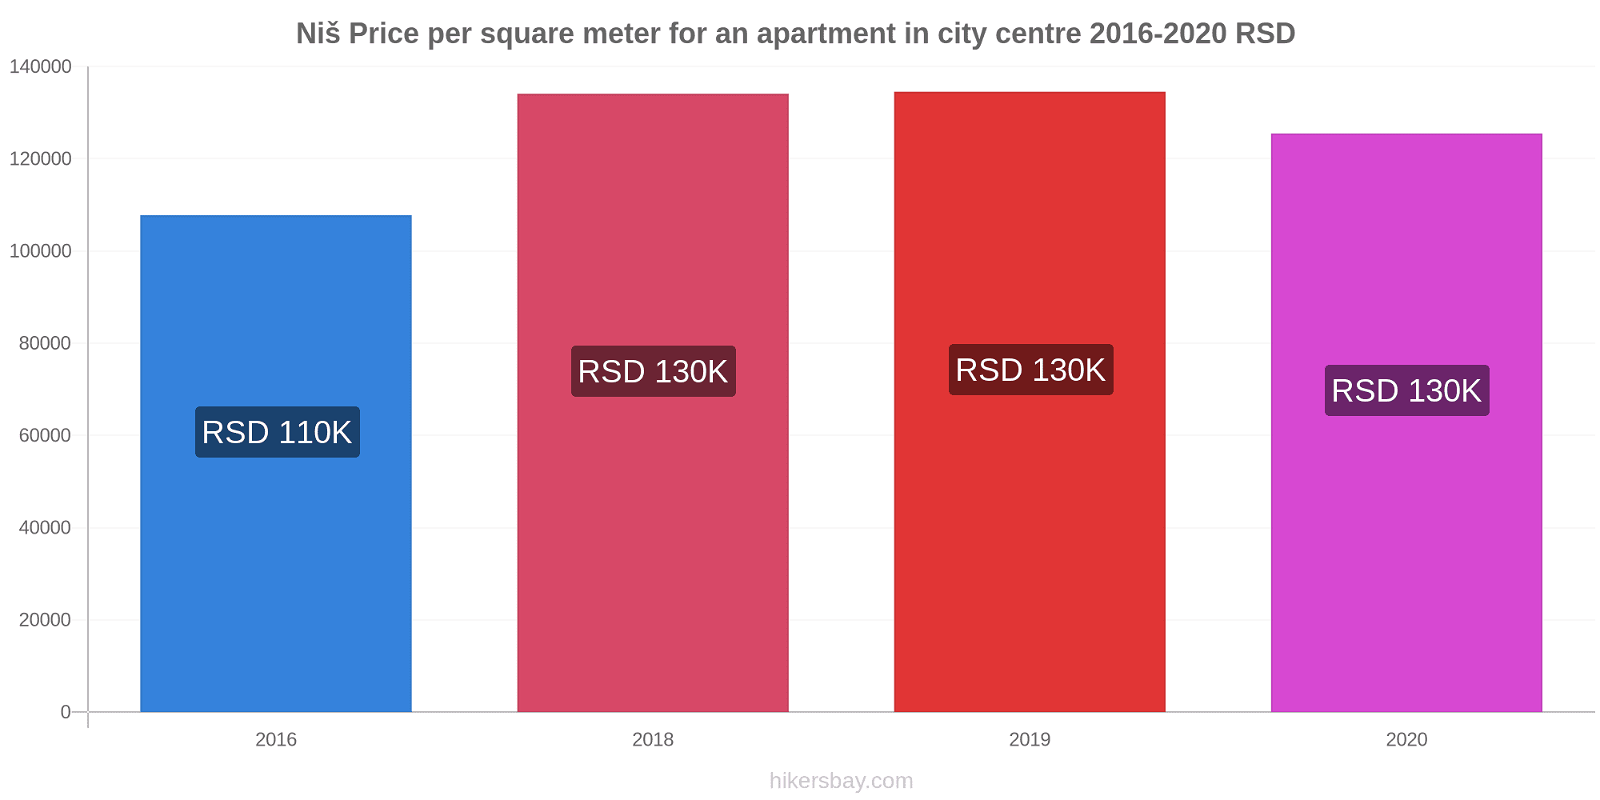 Niš price changes Price per square meter for an apartment in city centre hikersbay.com